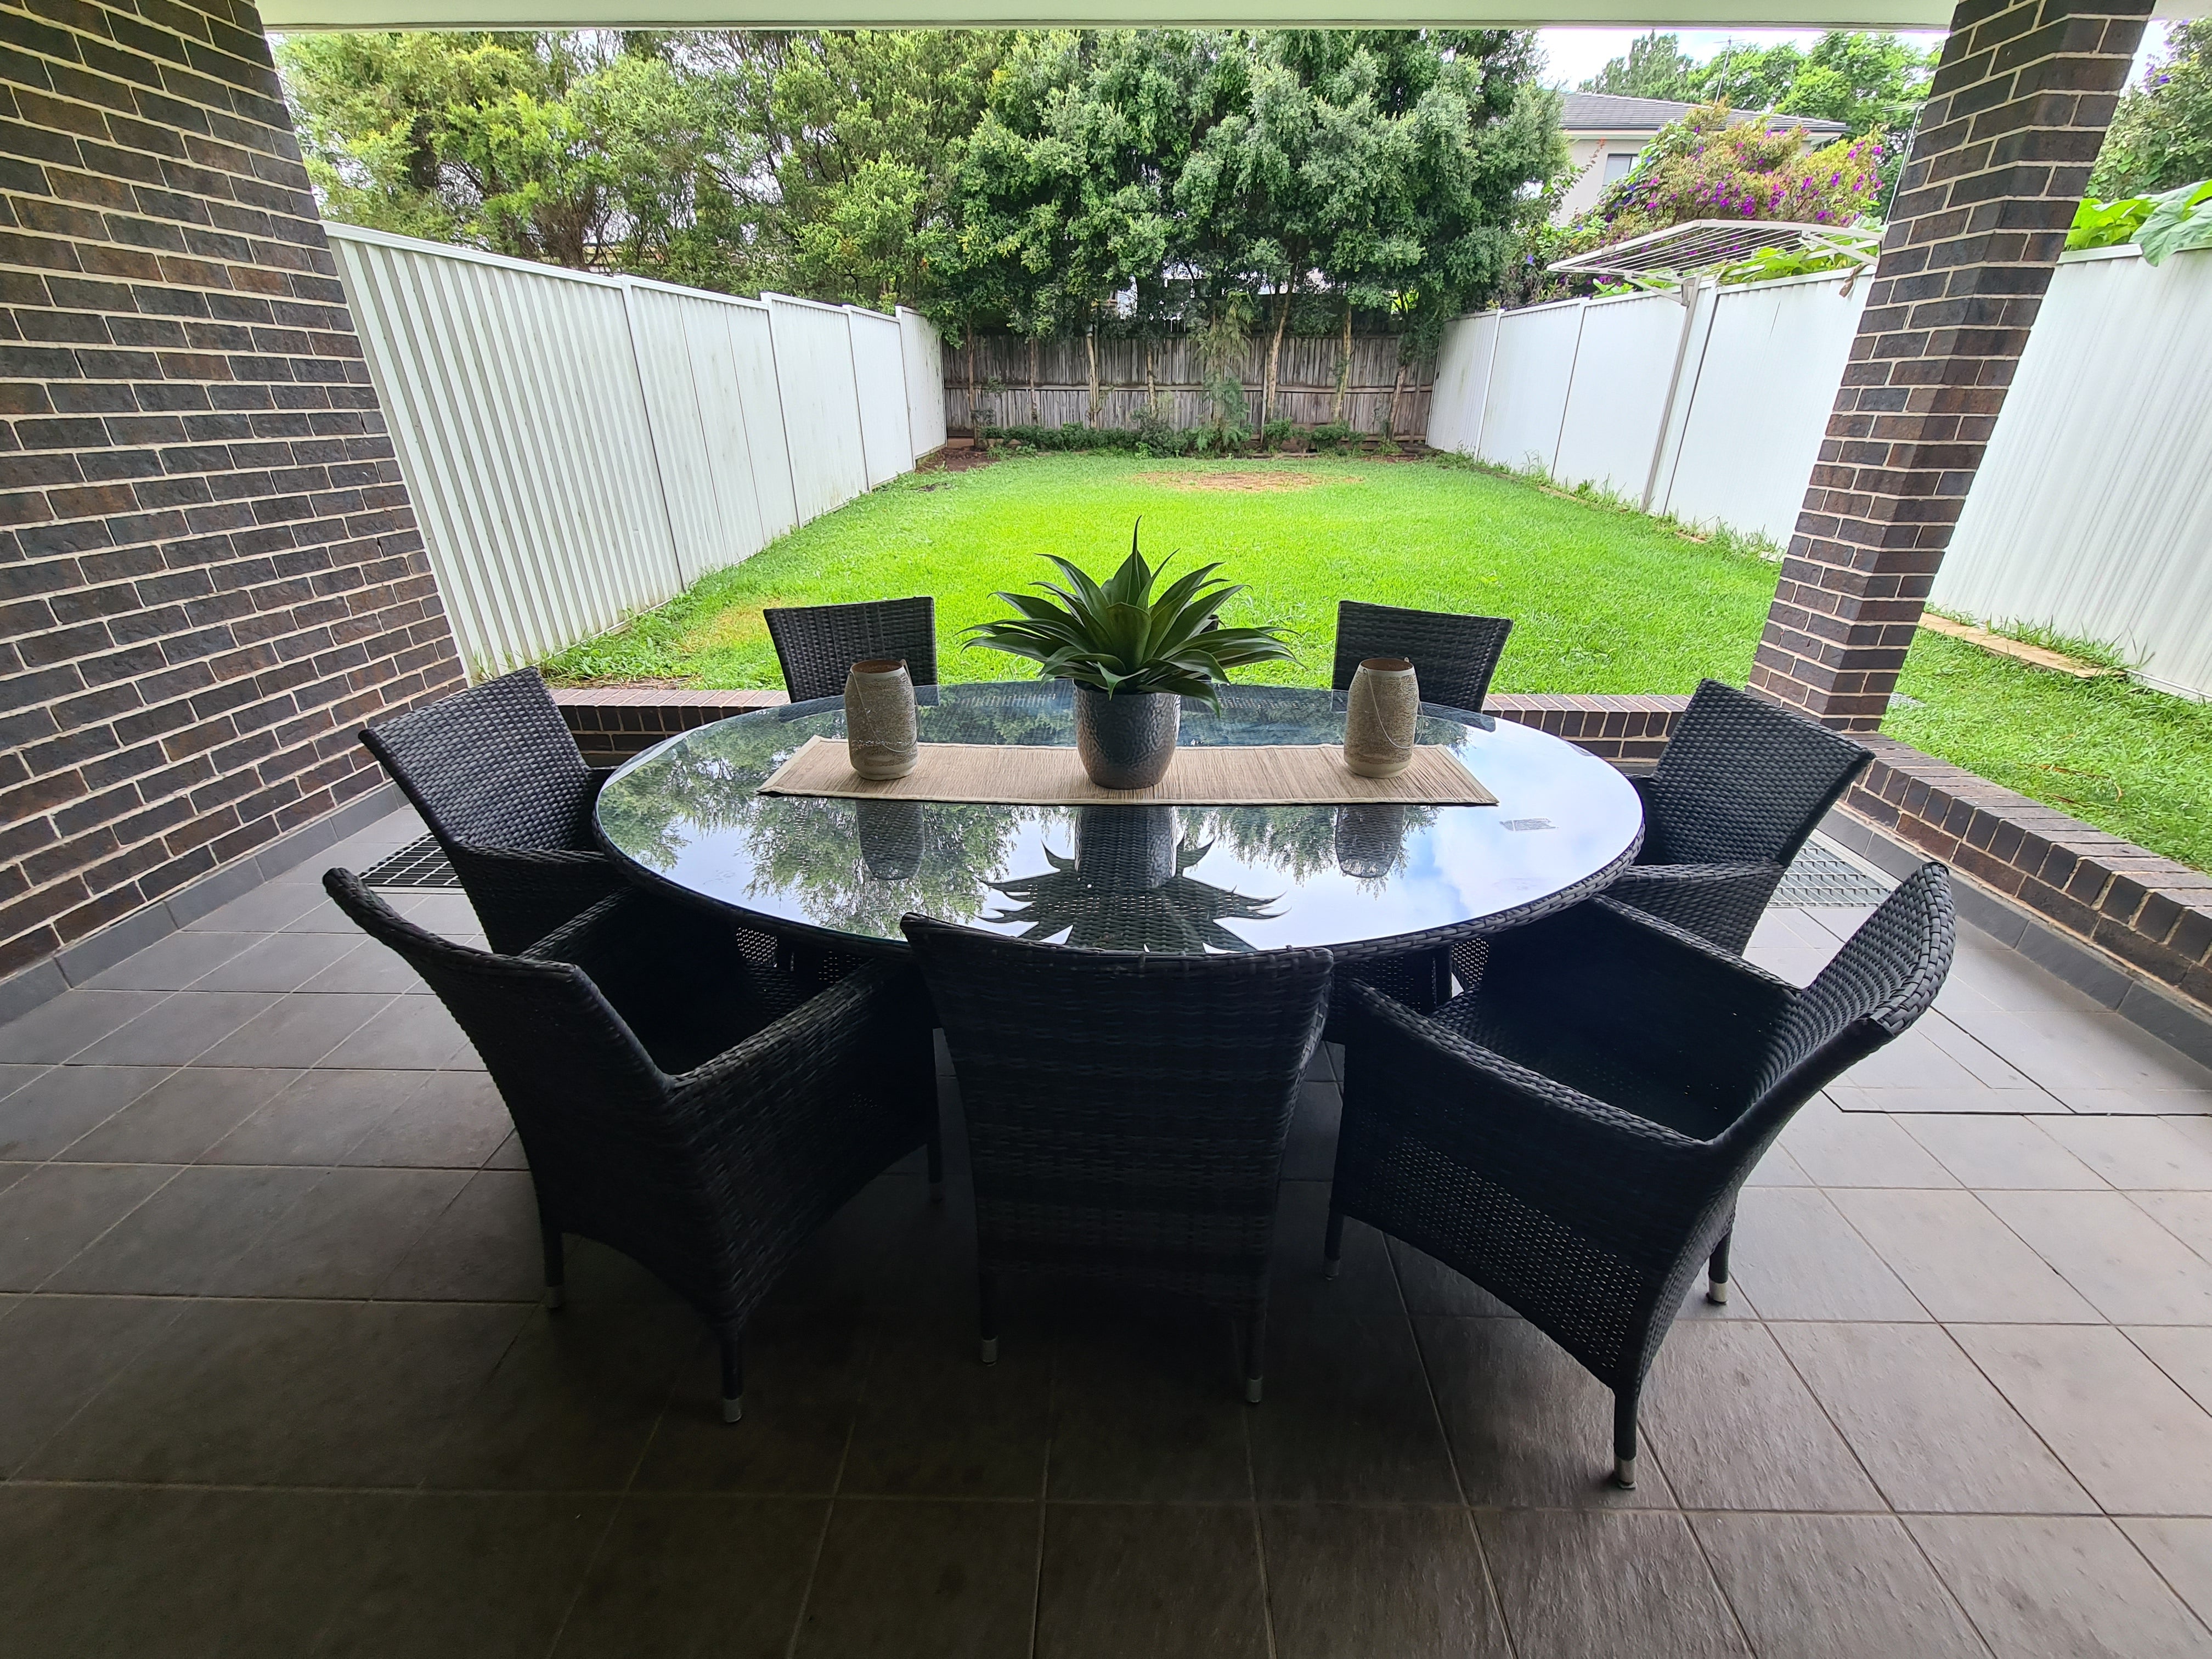 8 Seater Charcoal Rattan Outdoor Dining Set - $50 / week (6 week hire)